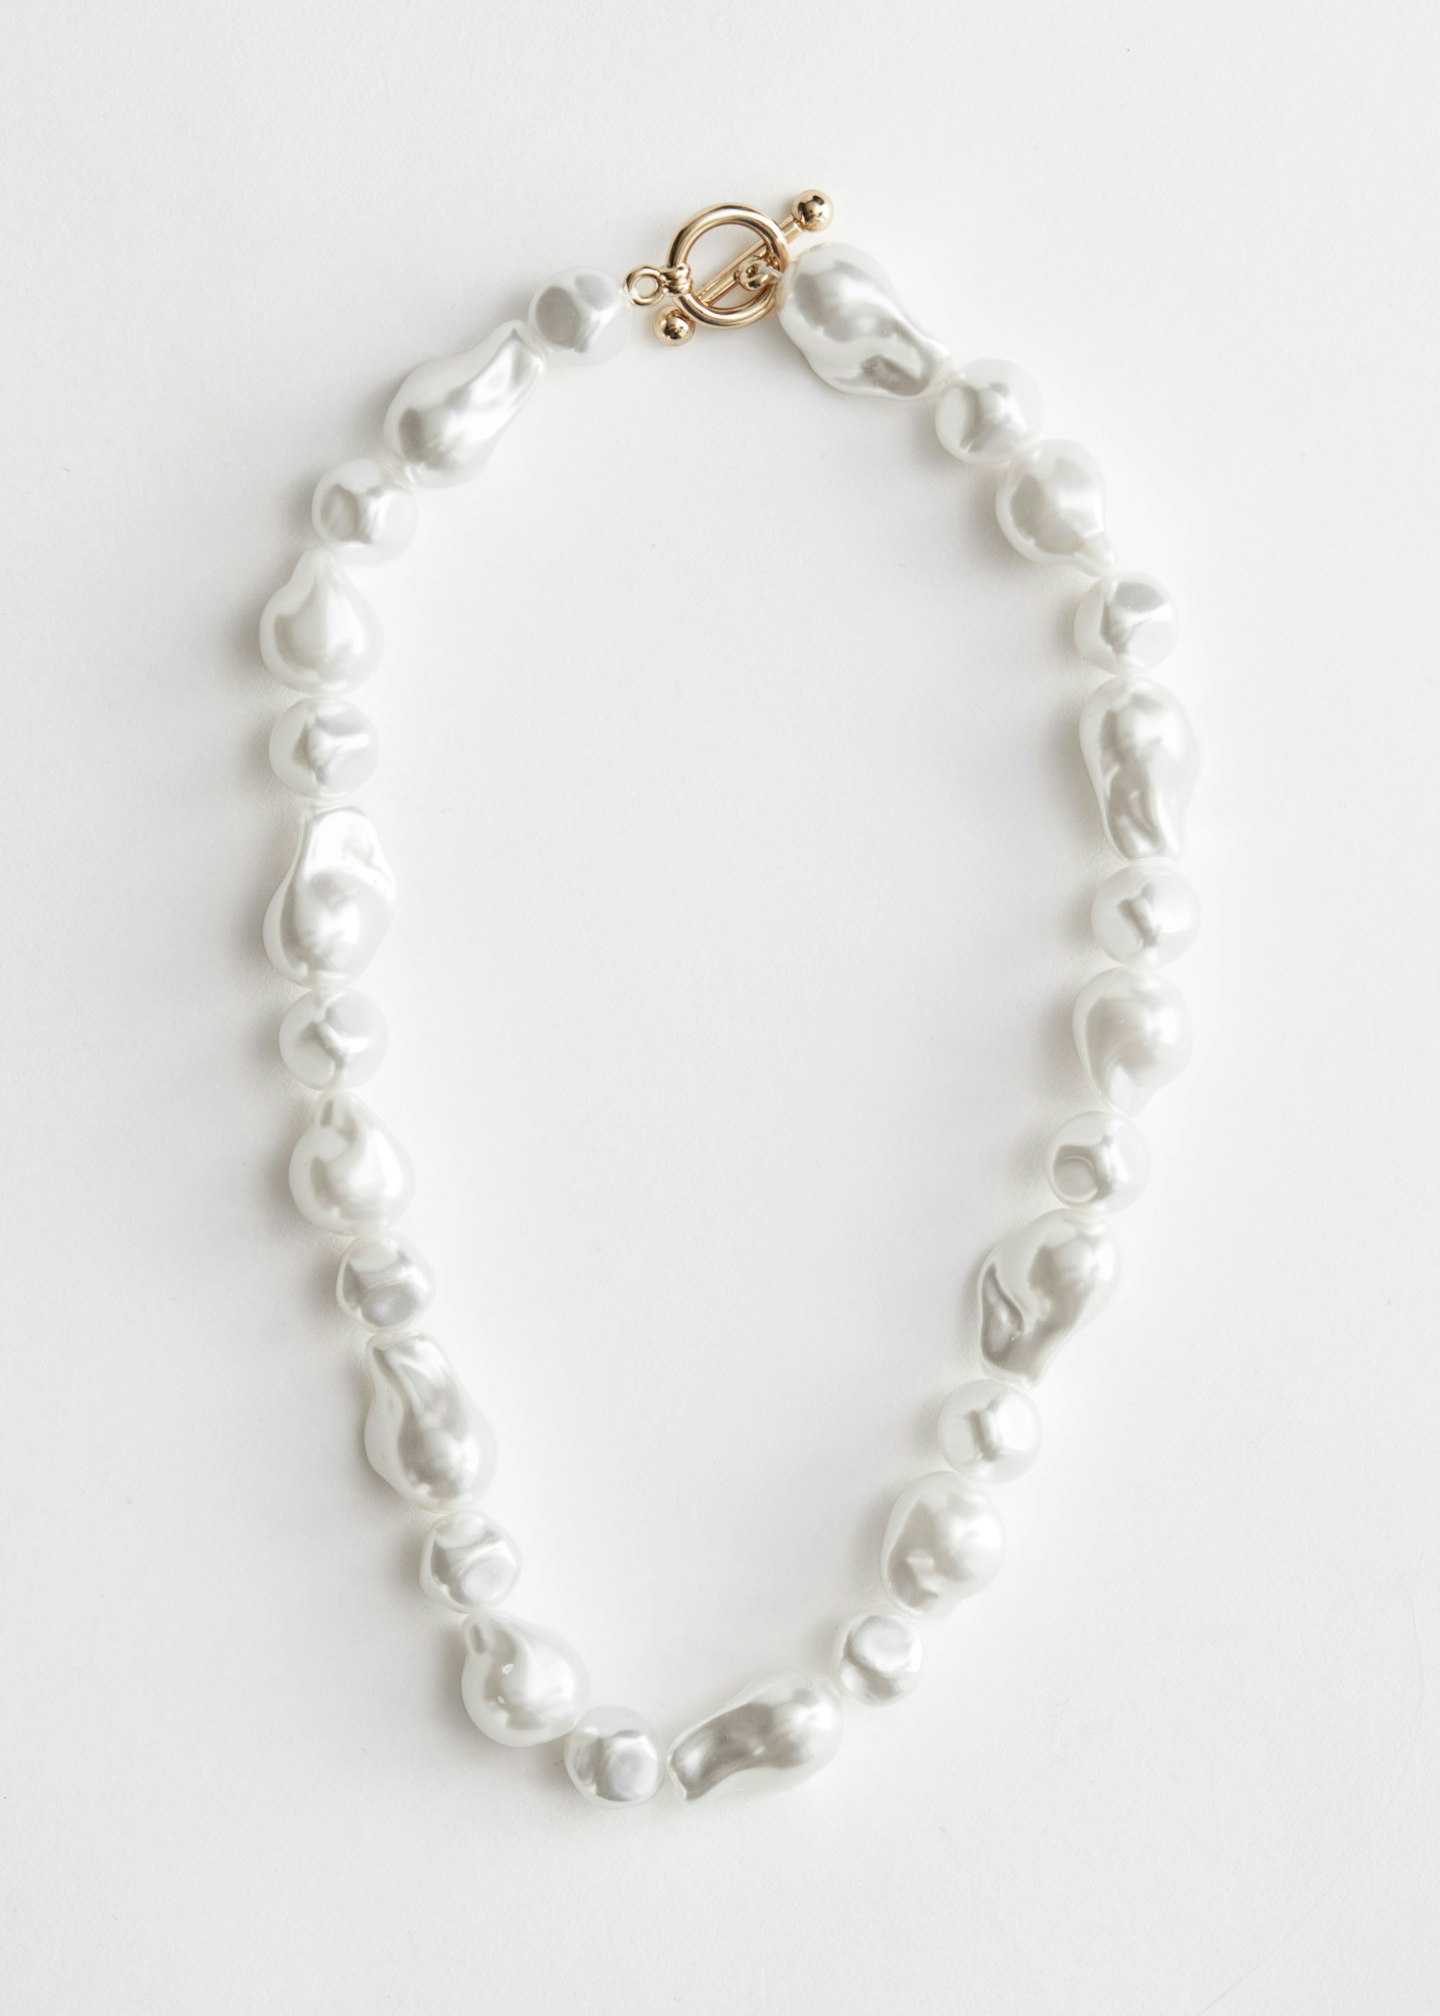 & Other Stories, Organic Pearl Bead Necklace, £27